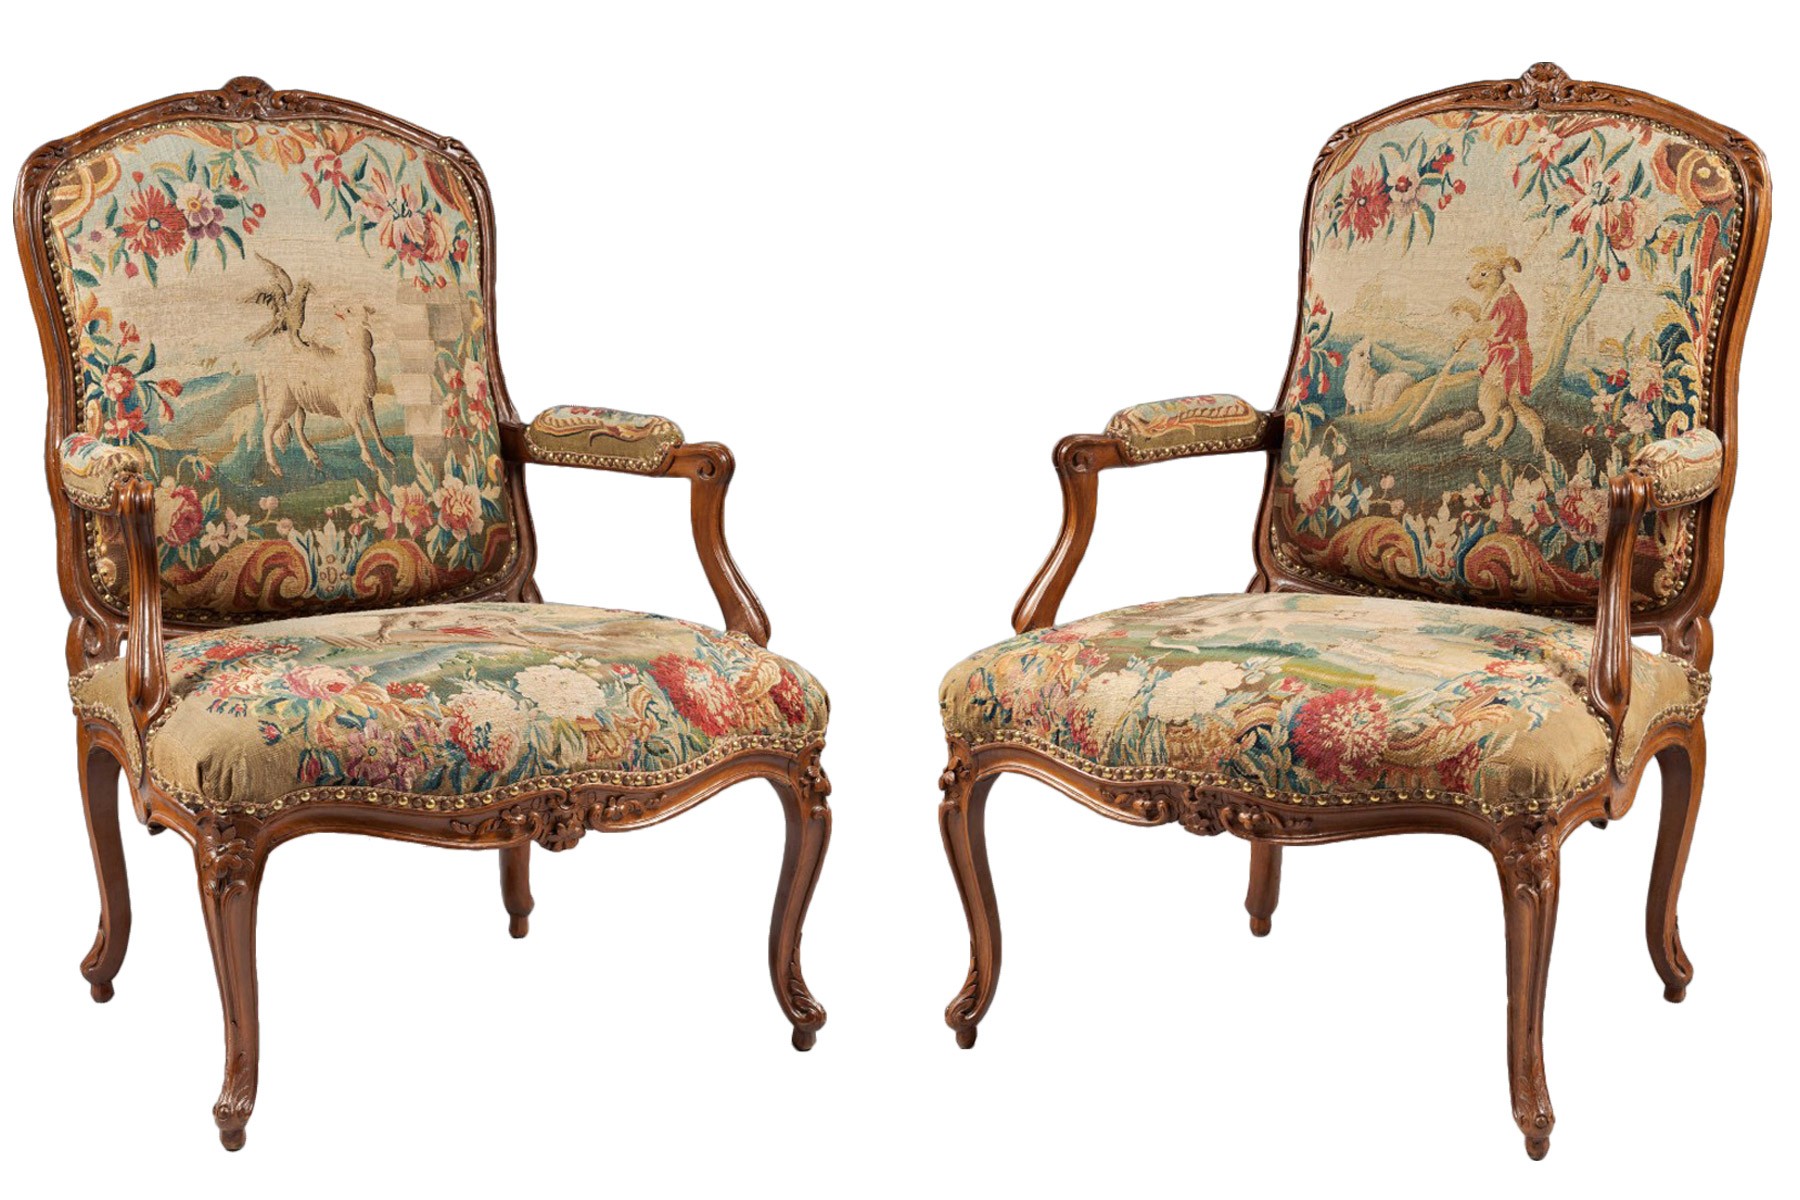 Antique French Walnut Louis XV Arm Chair - Reupholstered — The Art